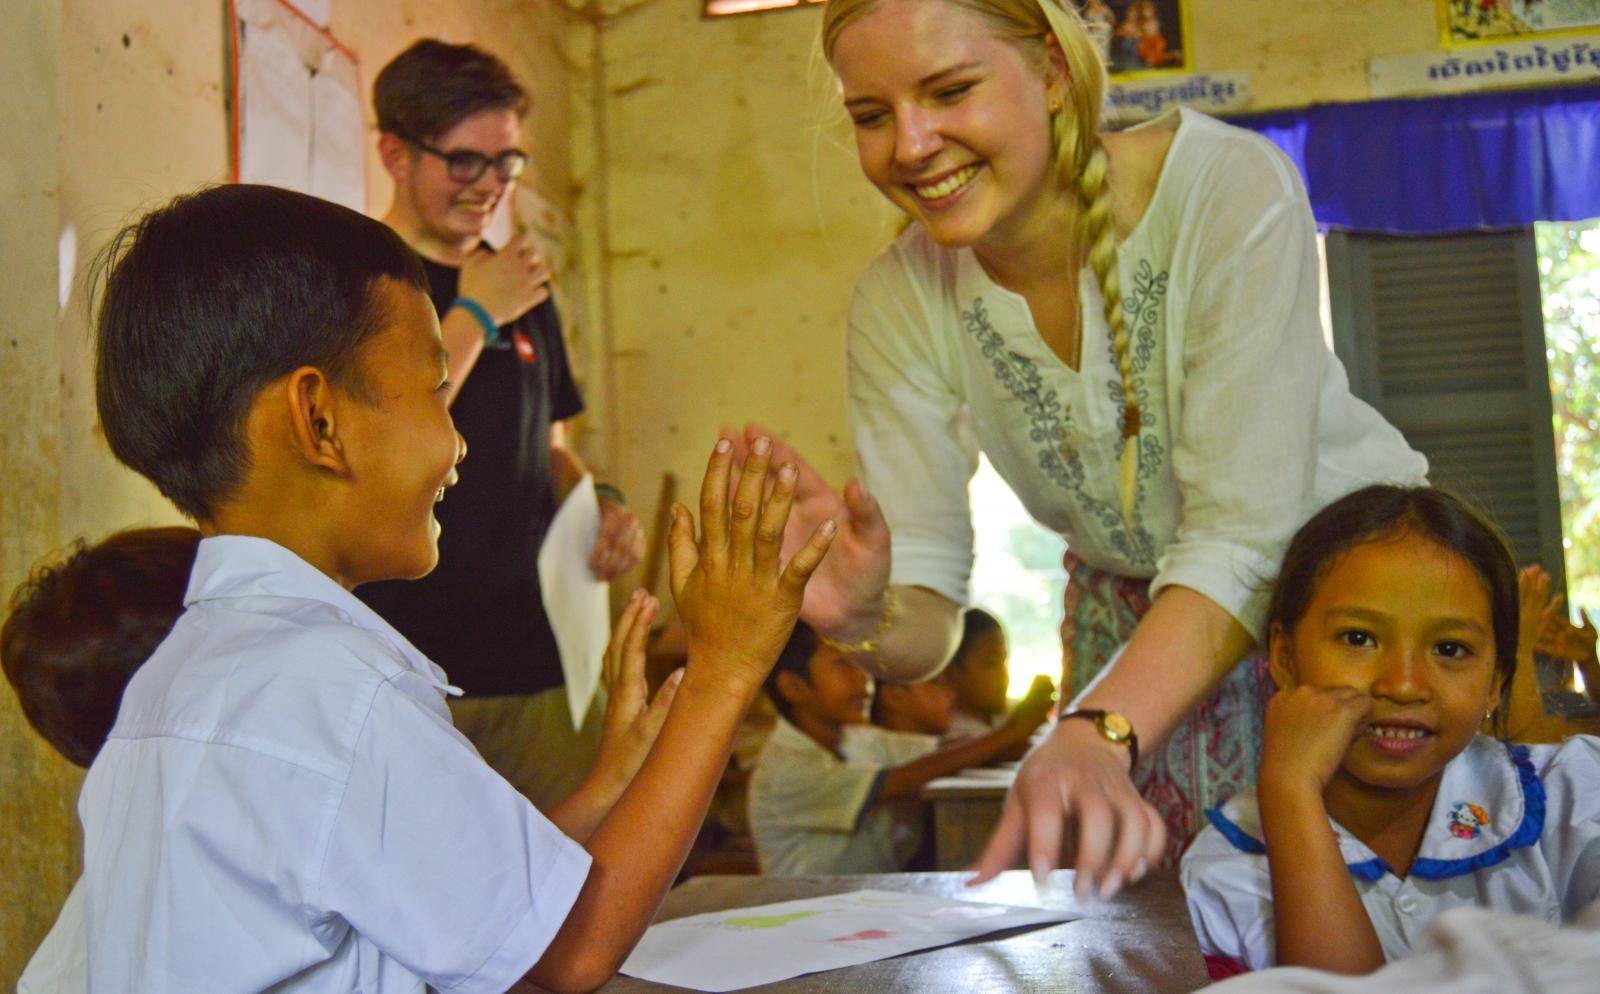 A female volunteer gives a child feedback while teaching abroad after she booked a trip overseas with us.